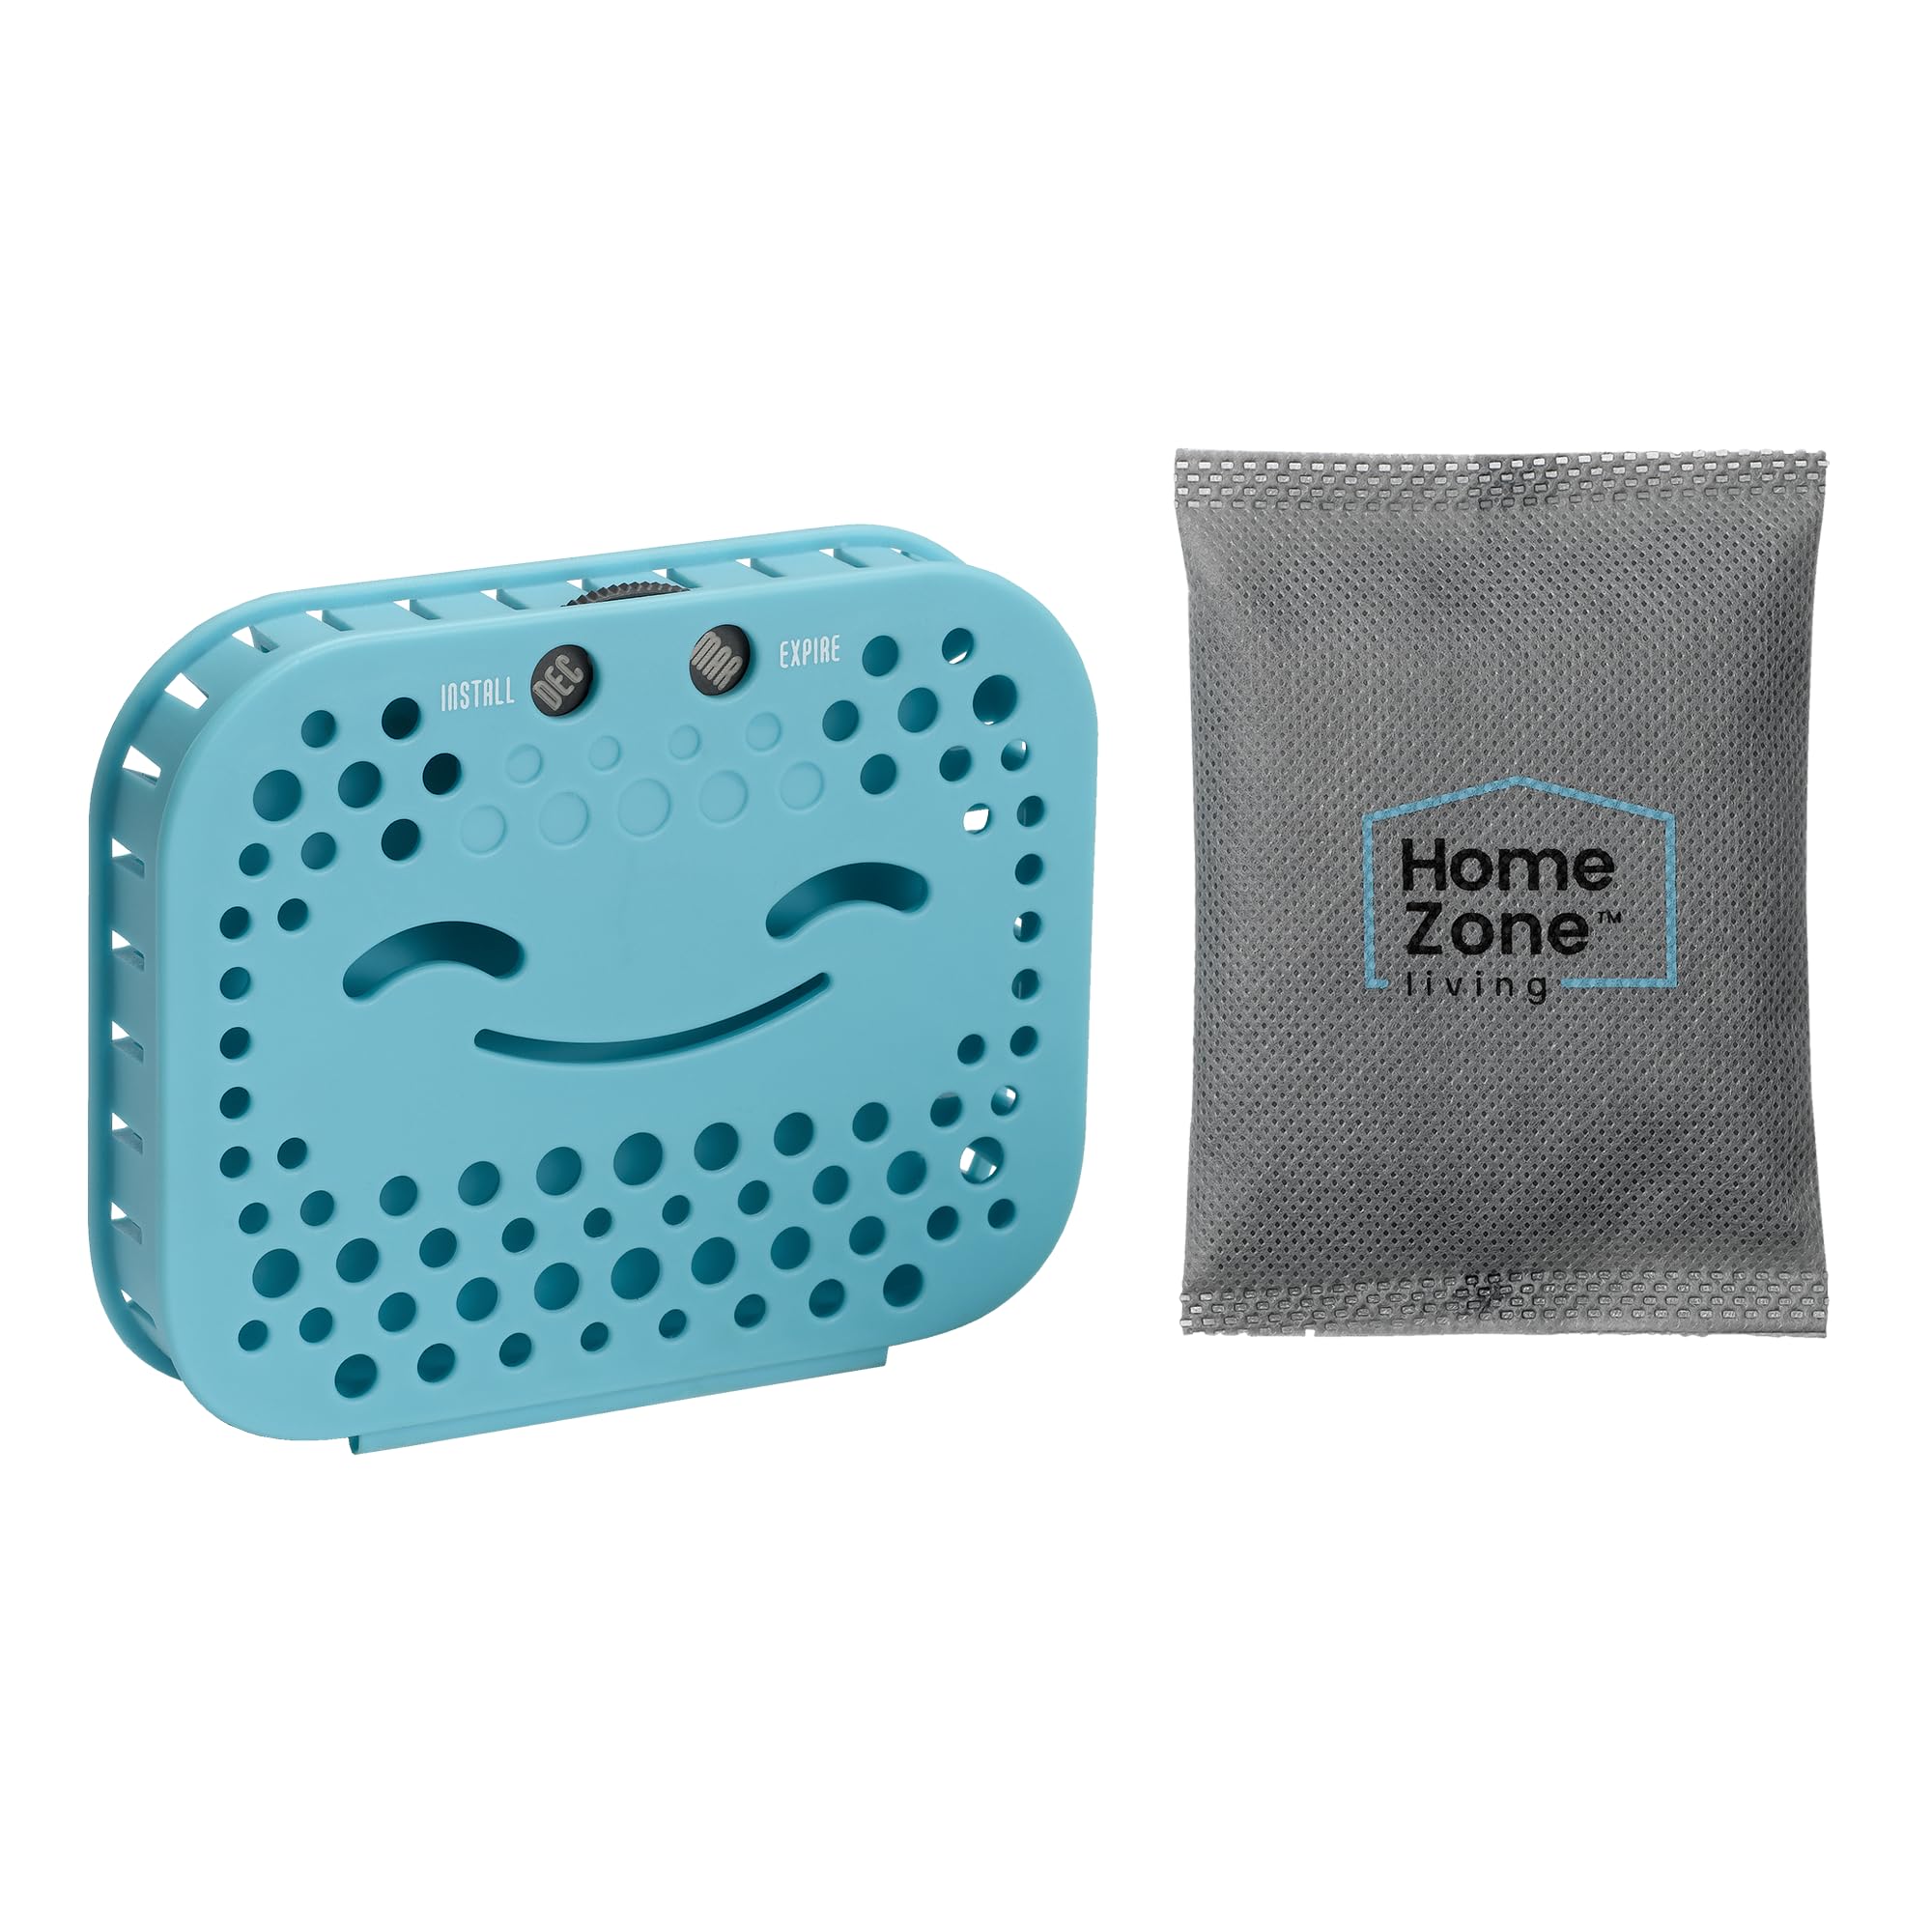 Home Zone Living CleanAura Deodorizing Filter Kit with Charcoal Filter Bag and Magnetic Sticker, Helps Eliminate Odor at Home